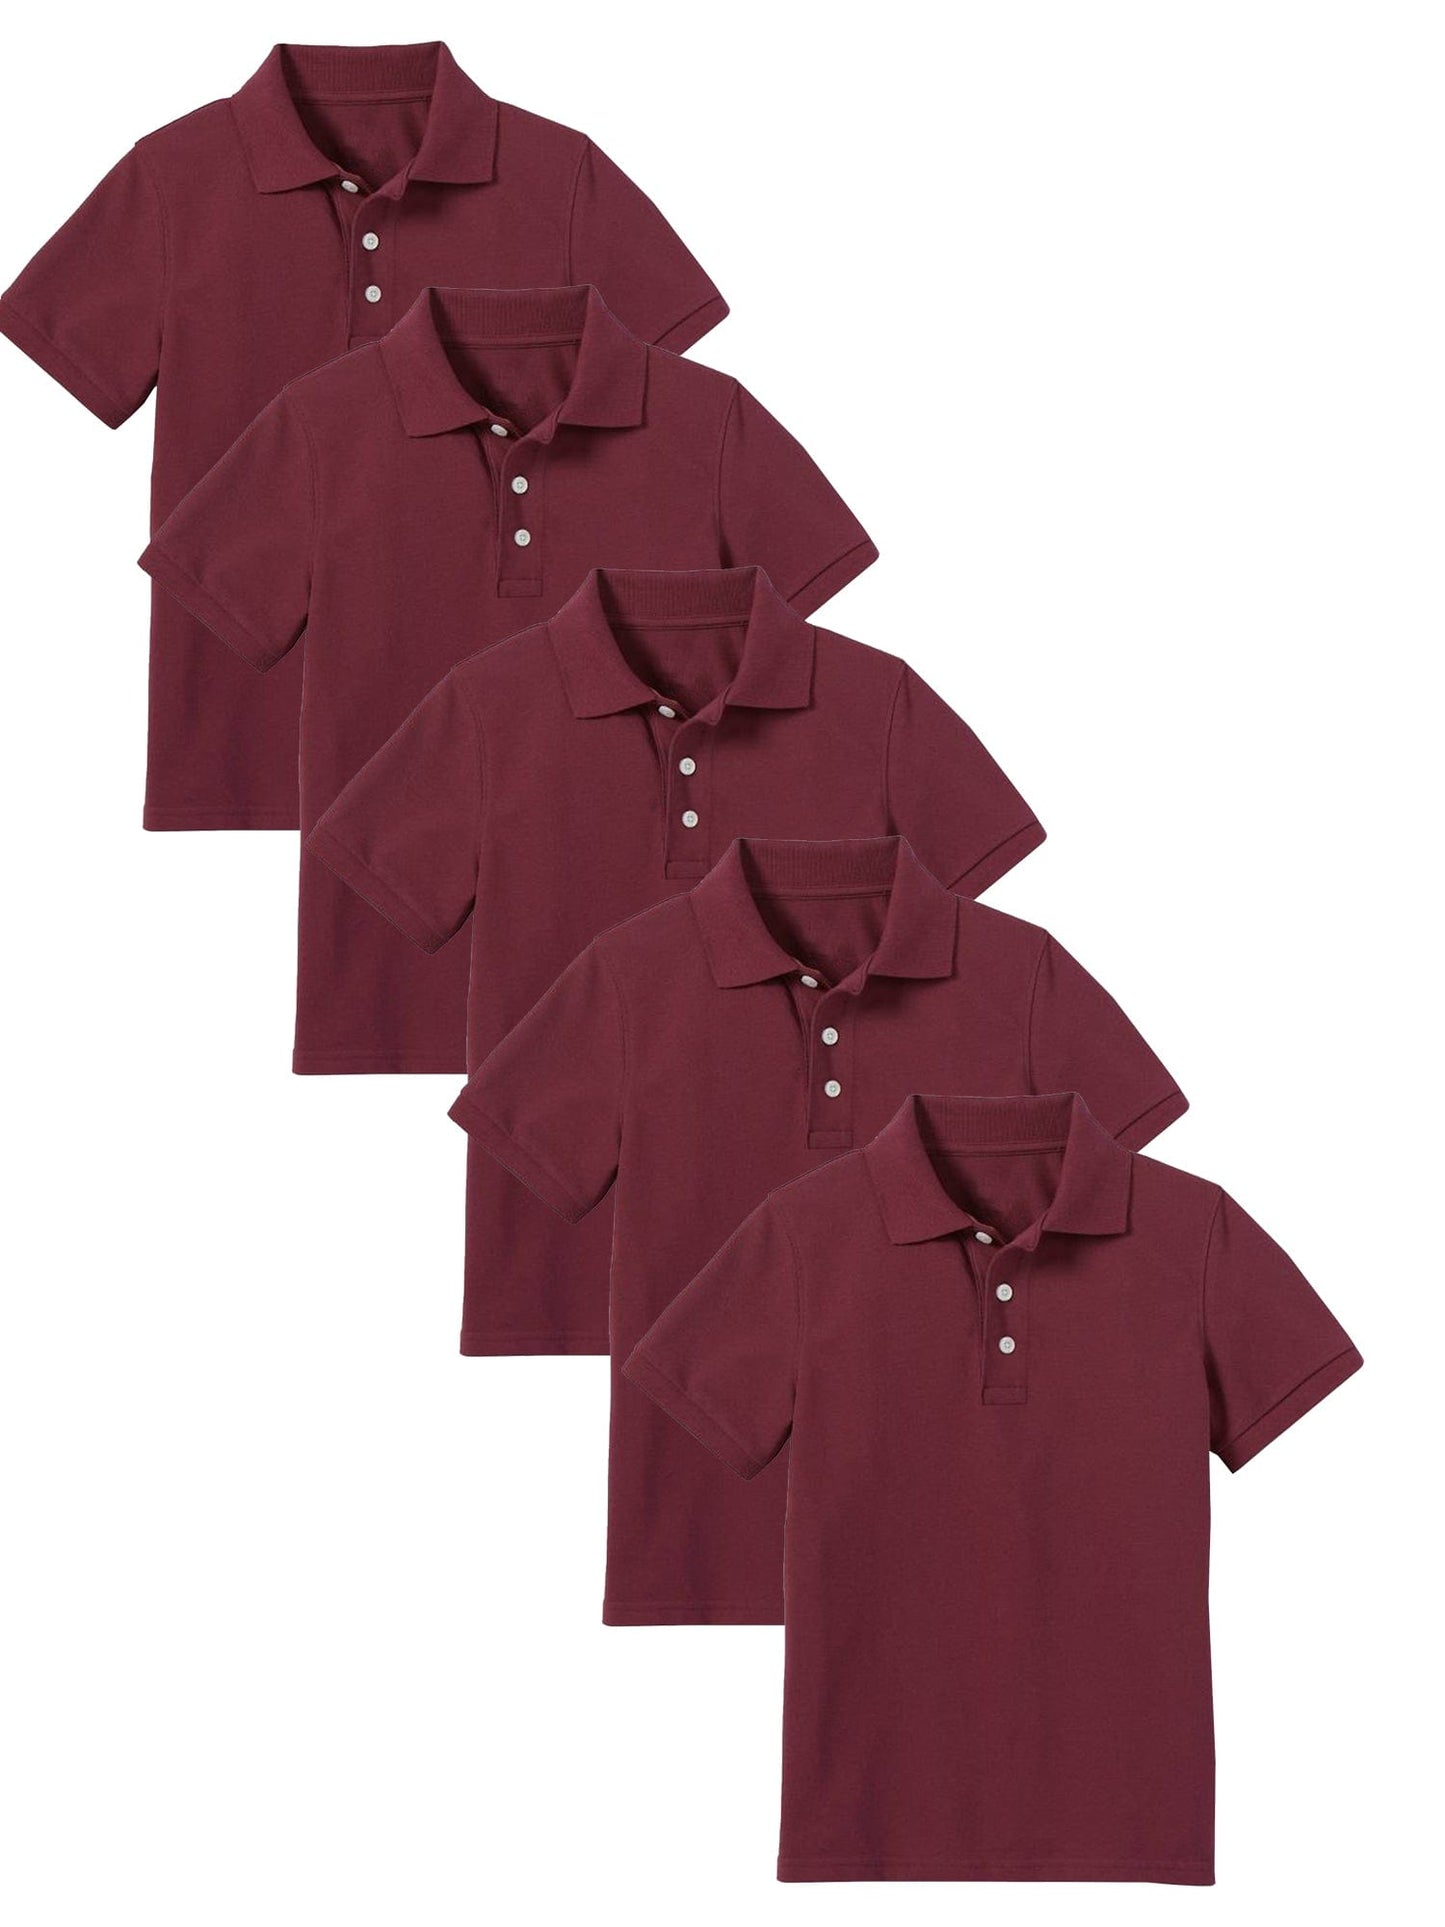 Boy's (5-PACK) Short Sleeve Polo Shirt (Sizes 8-20) - GalaxybyHarvic